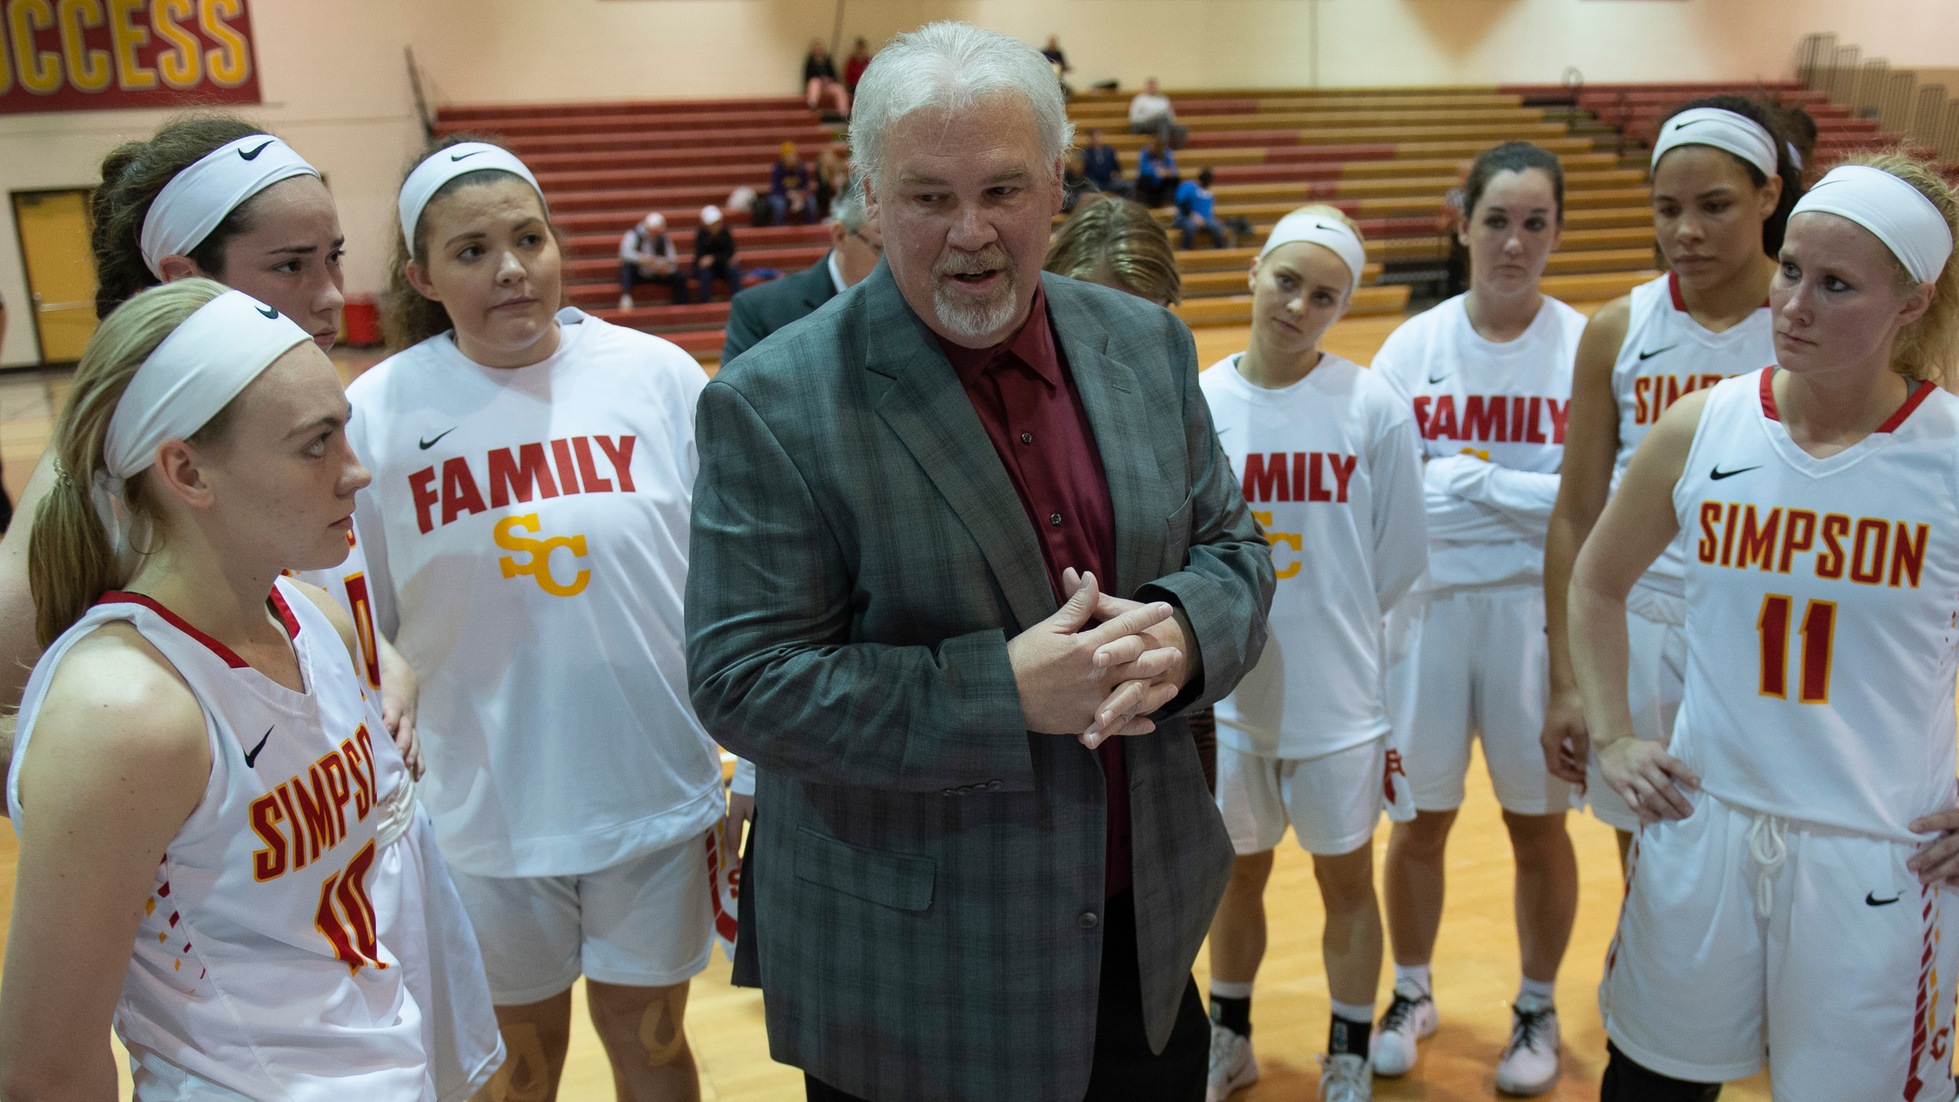 Brian Niemuth received his 600th career victory as head coach of the Simpson women's basketball team.